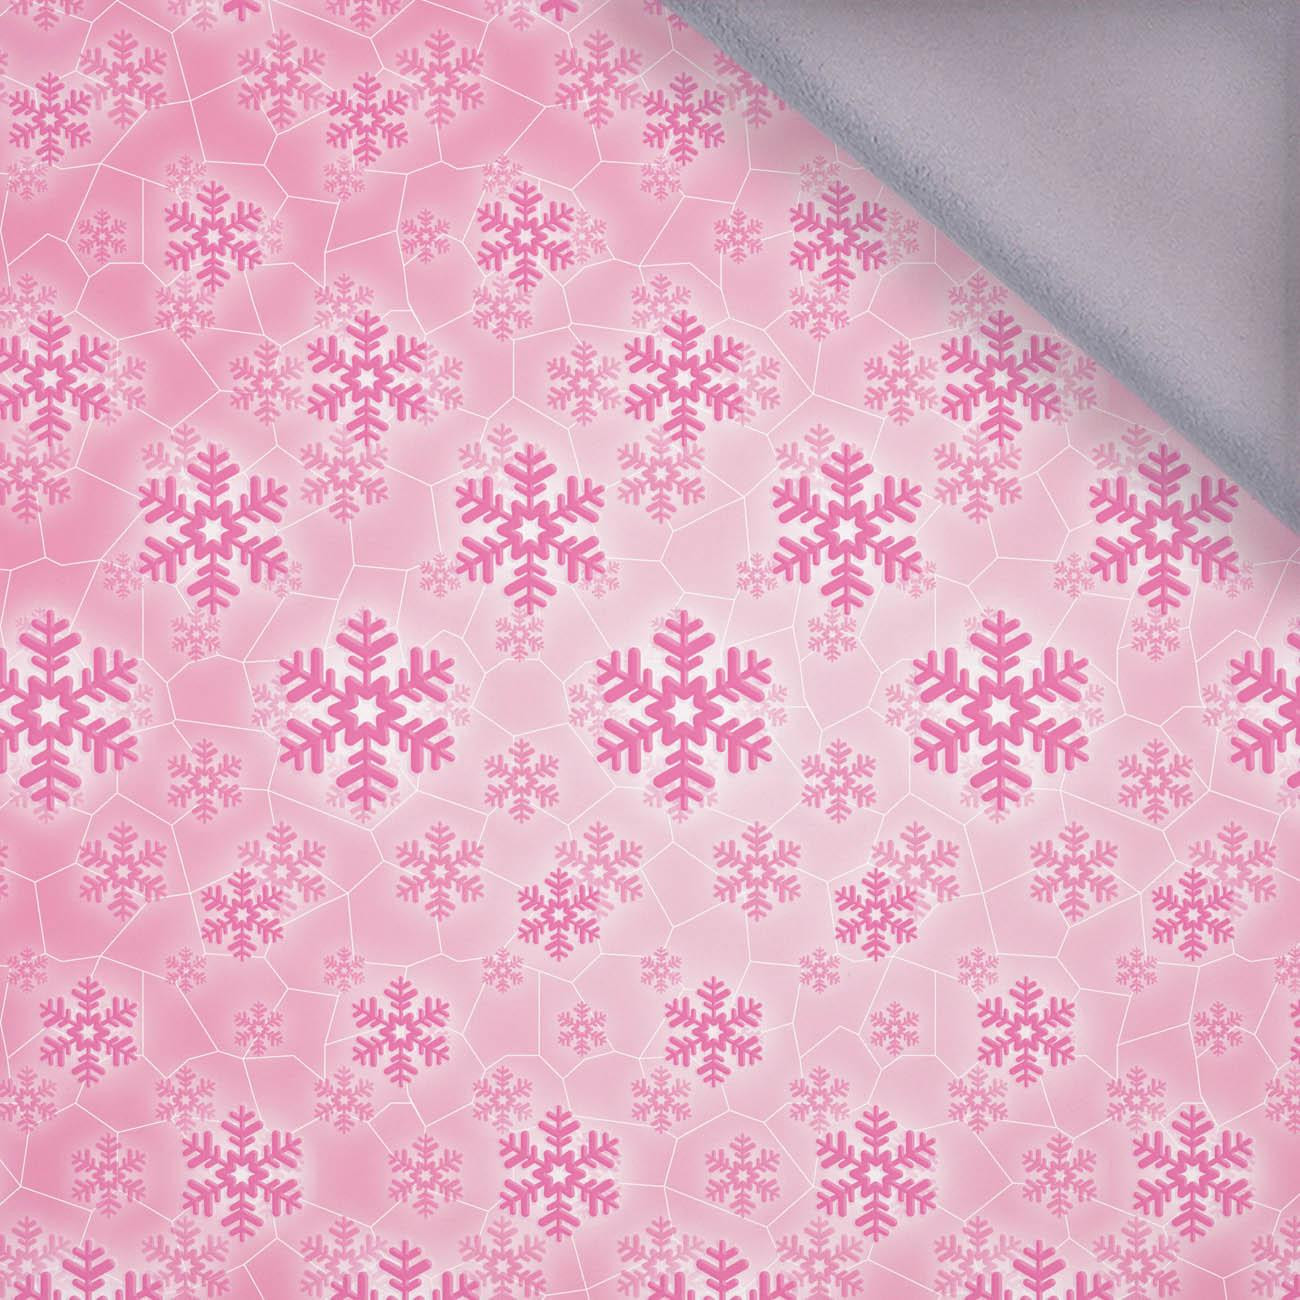 PINK SNOWFLAKES (PENGUINS) - softshell